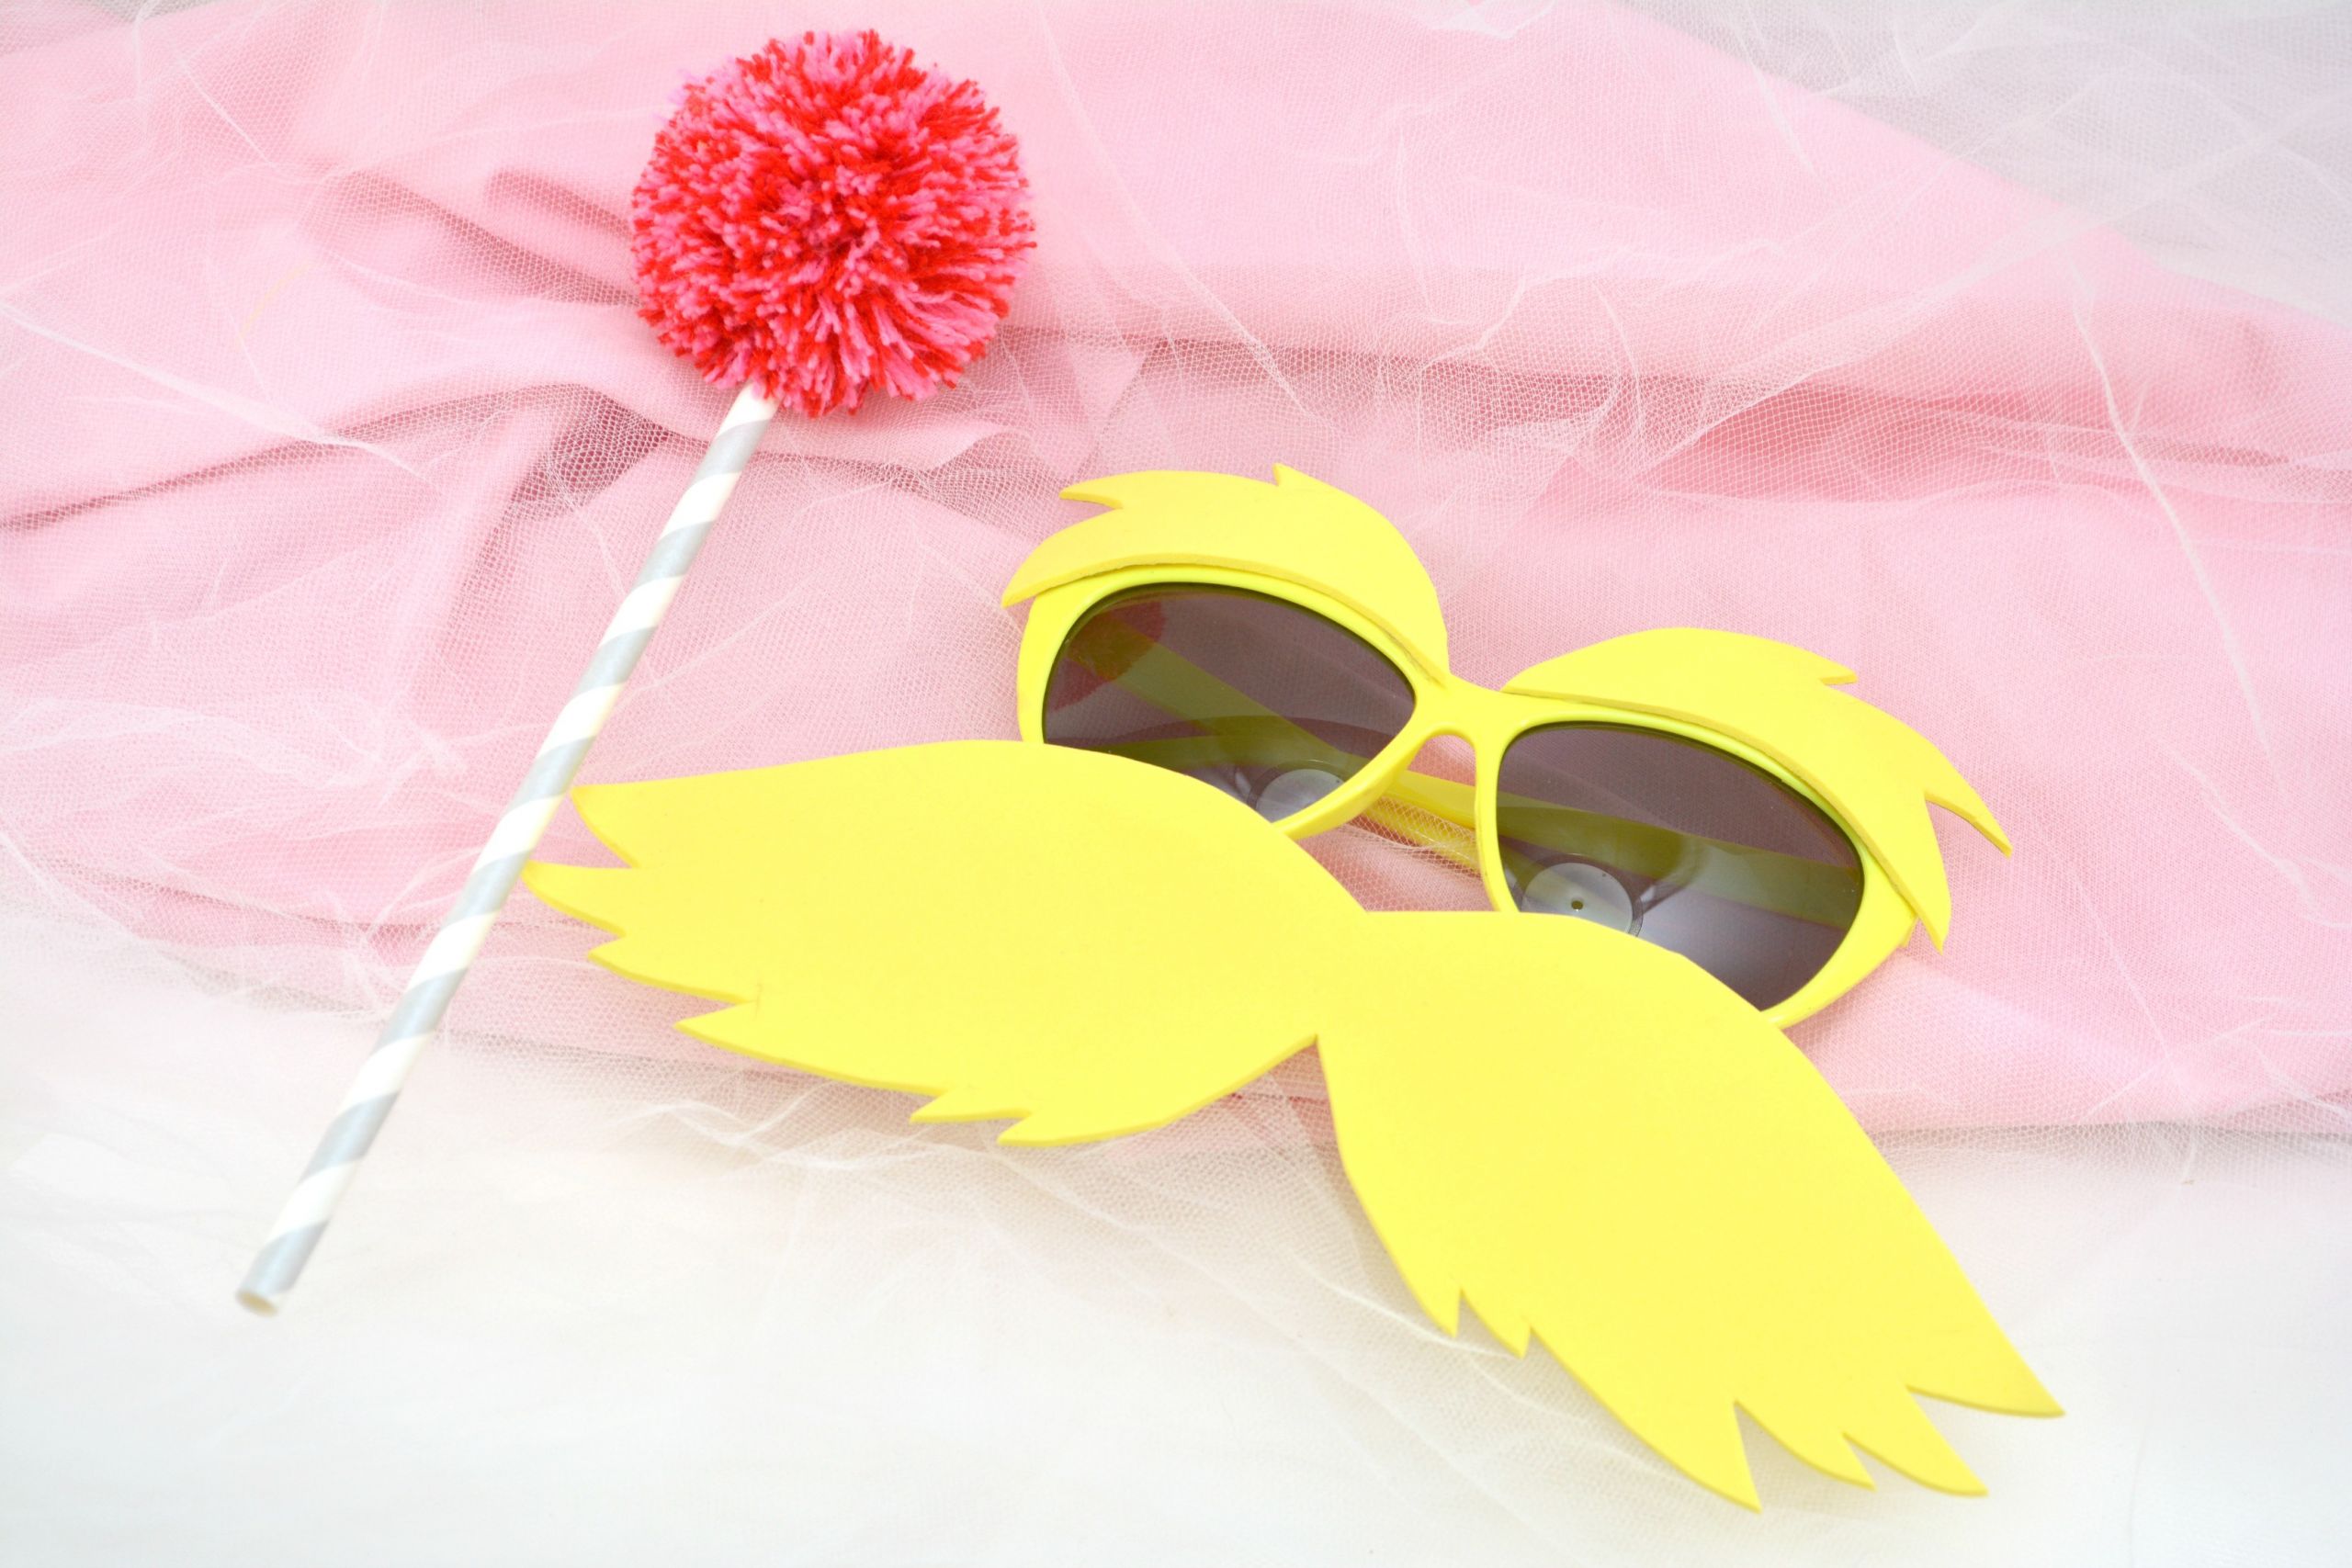 Lorax Costumes DIY
 How to Make Your Own DIY Lorax Costume Tutorial